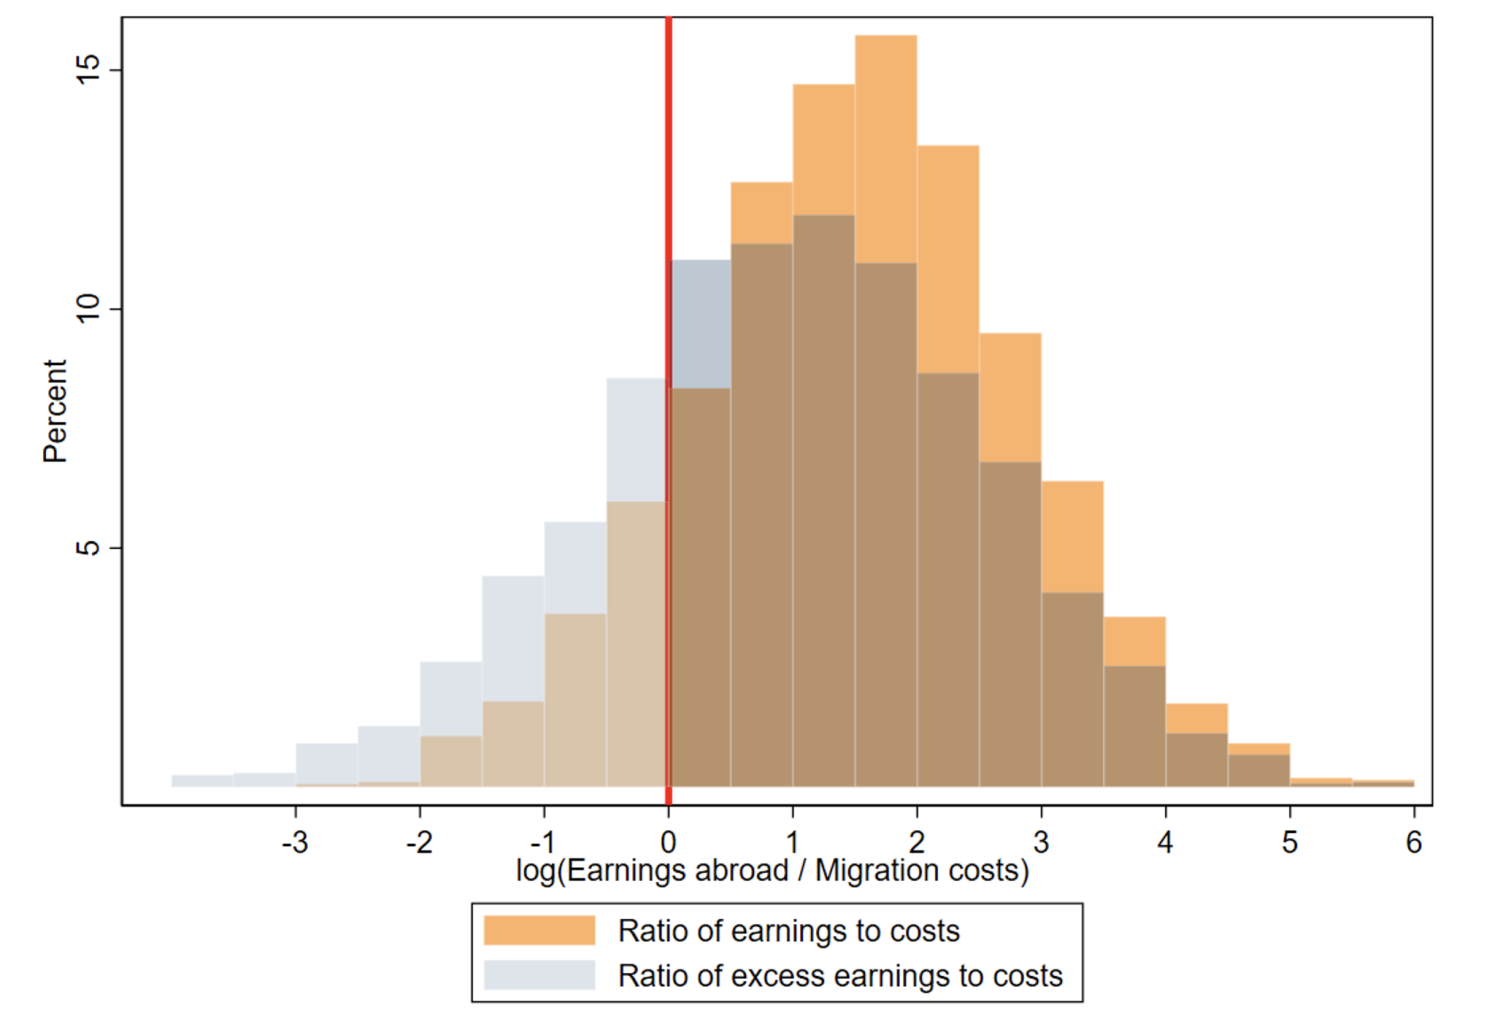 Figure 2 Ratio of excess earnings over migration costs among return migrants from Bangladesh